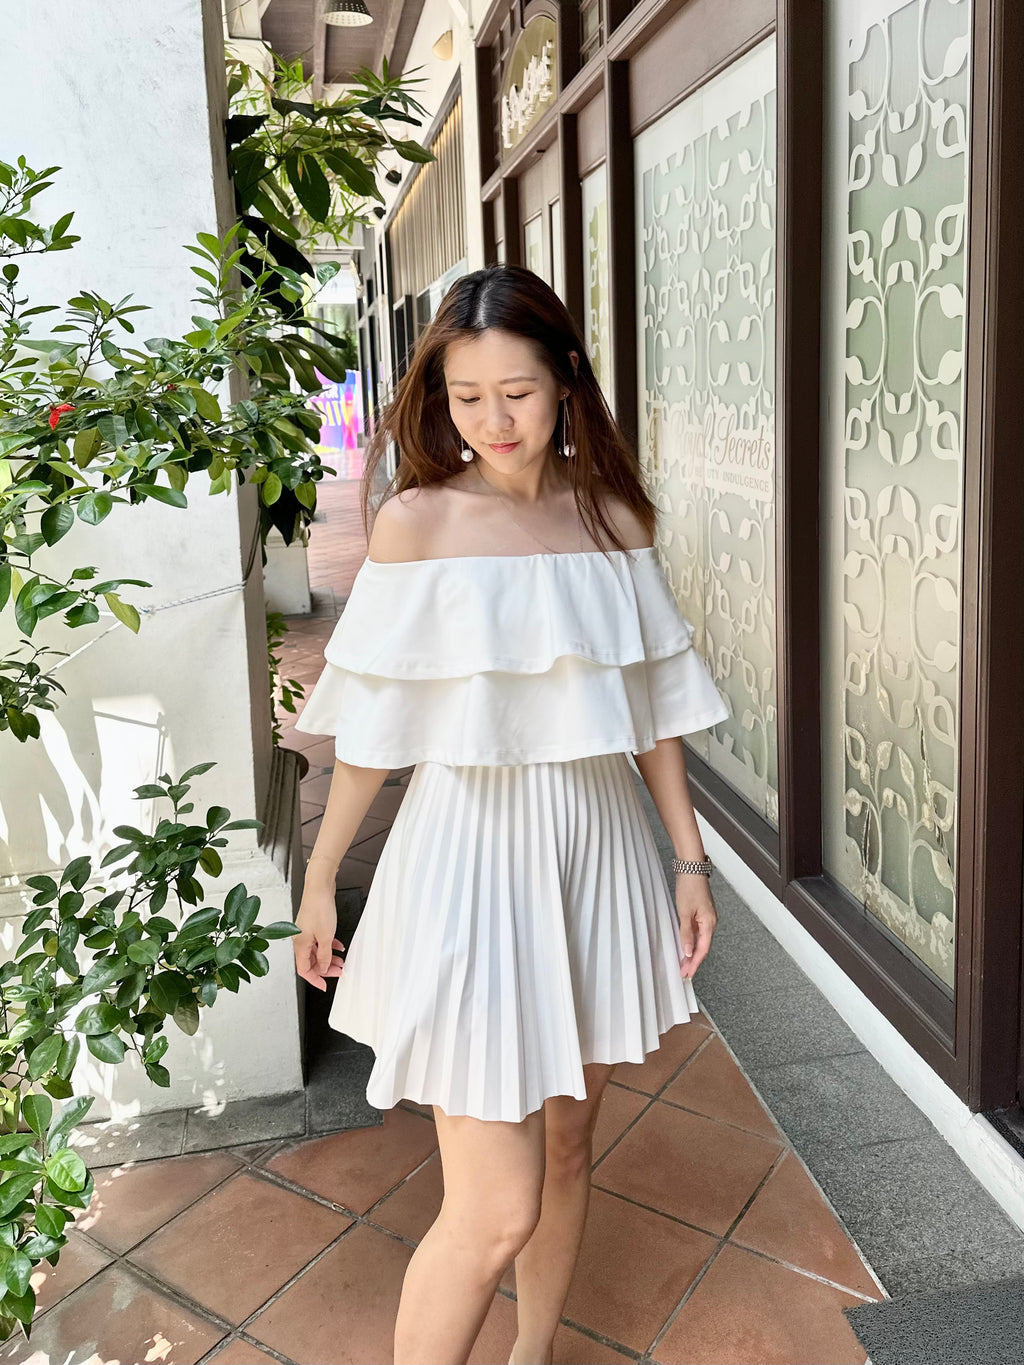 Xena Pleated Off Shoulder Dress (Loved)